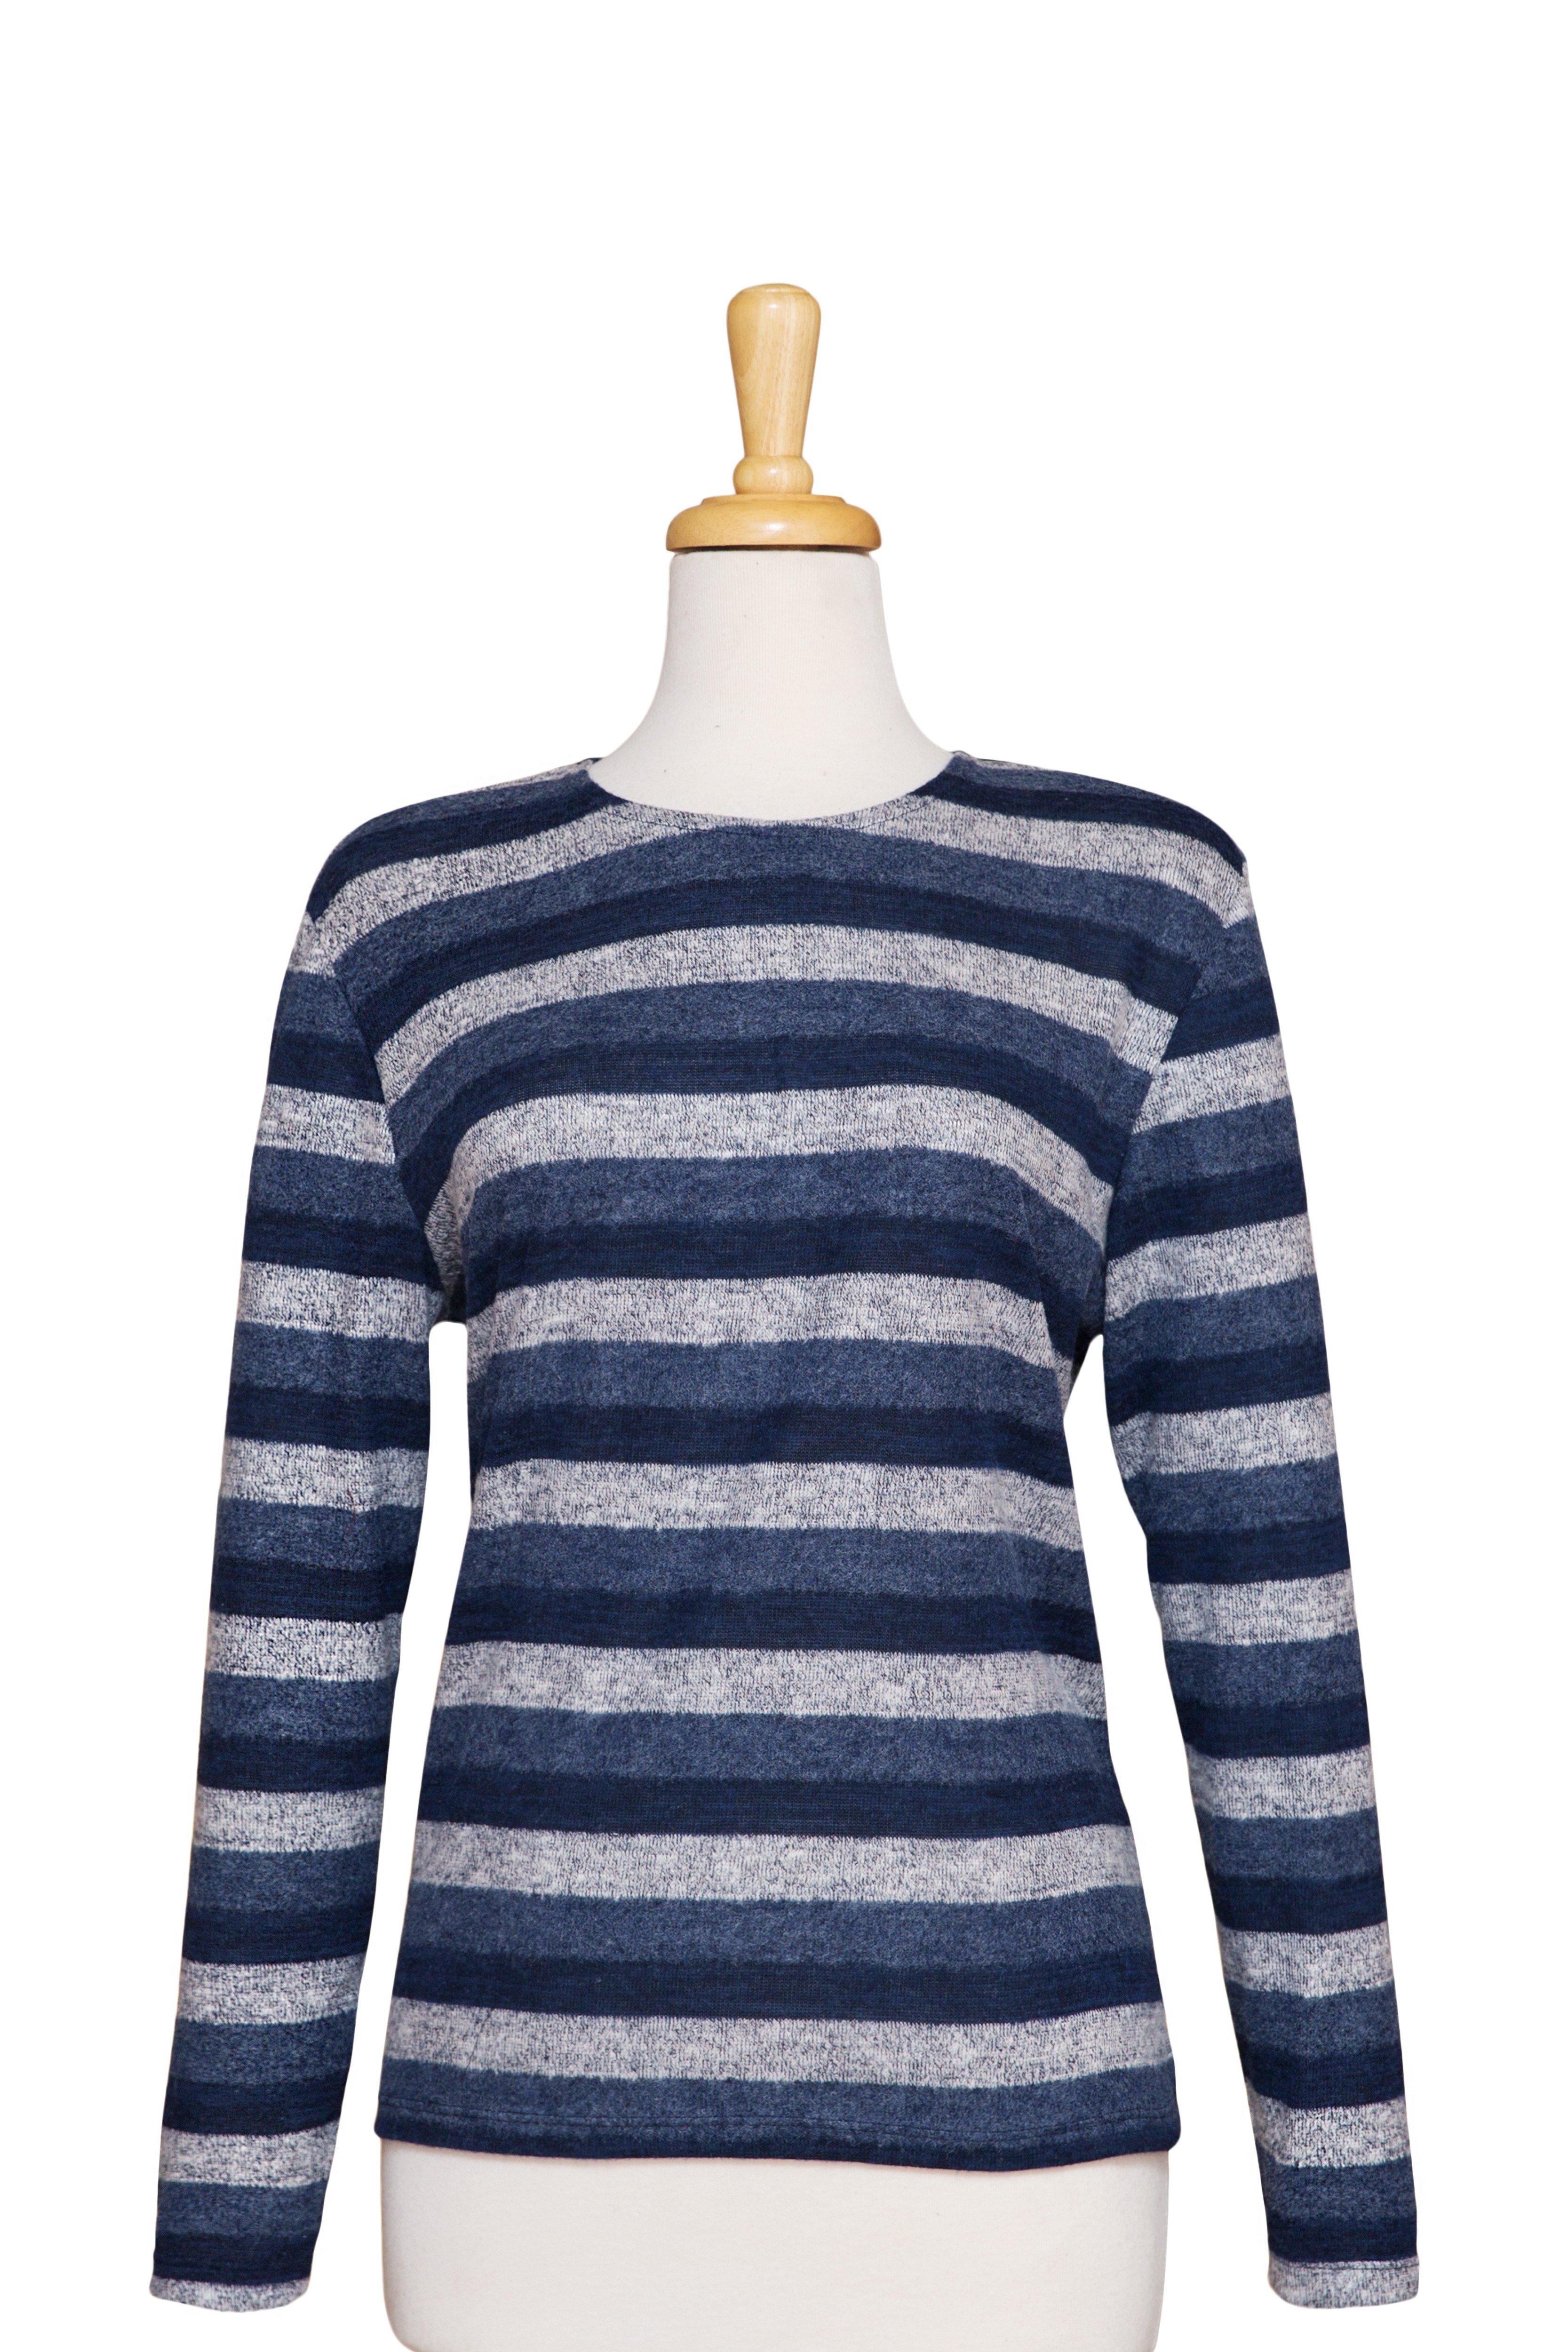 Plus Size Long Sleeve Shades Of Blue And Gray Stripes Knit Top